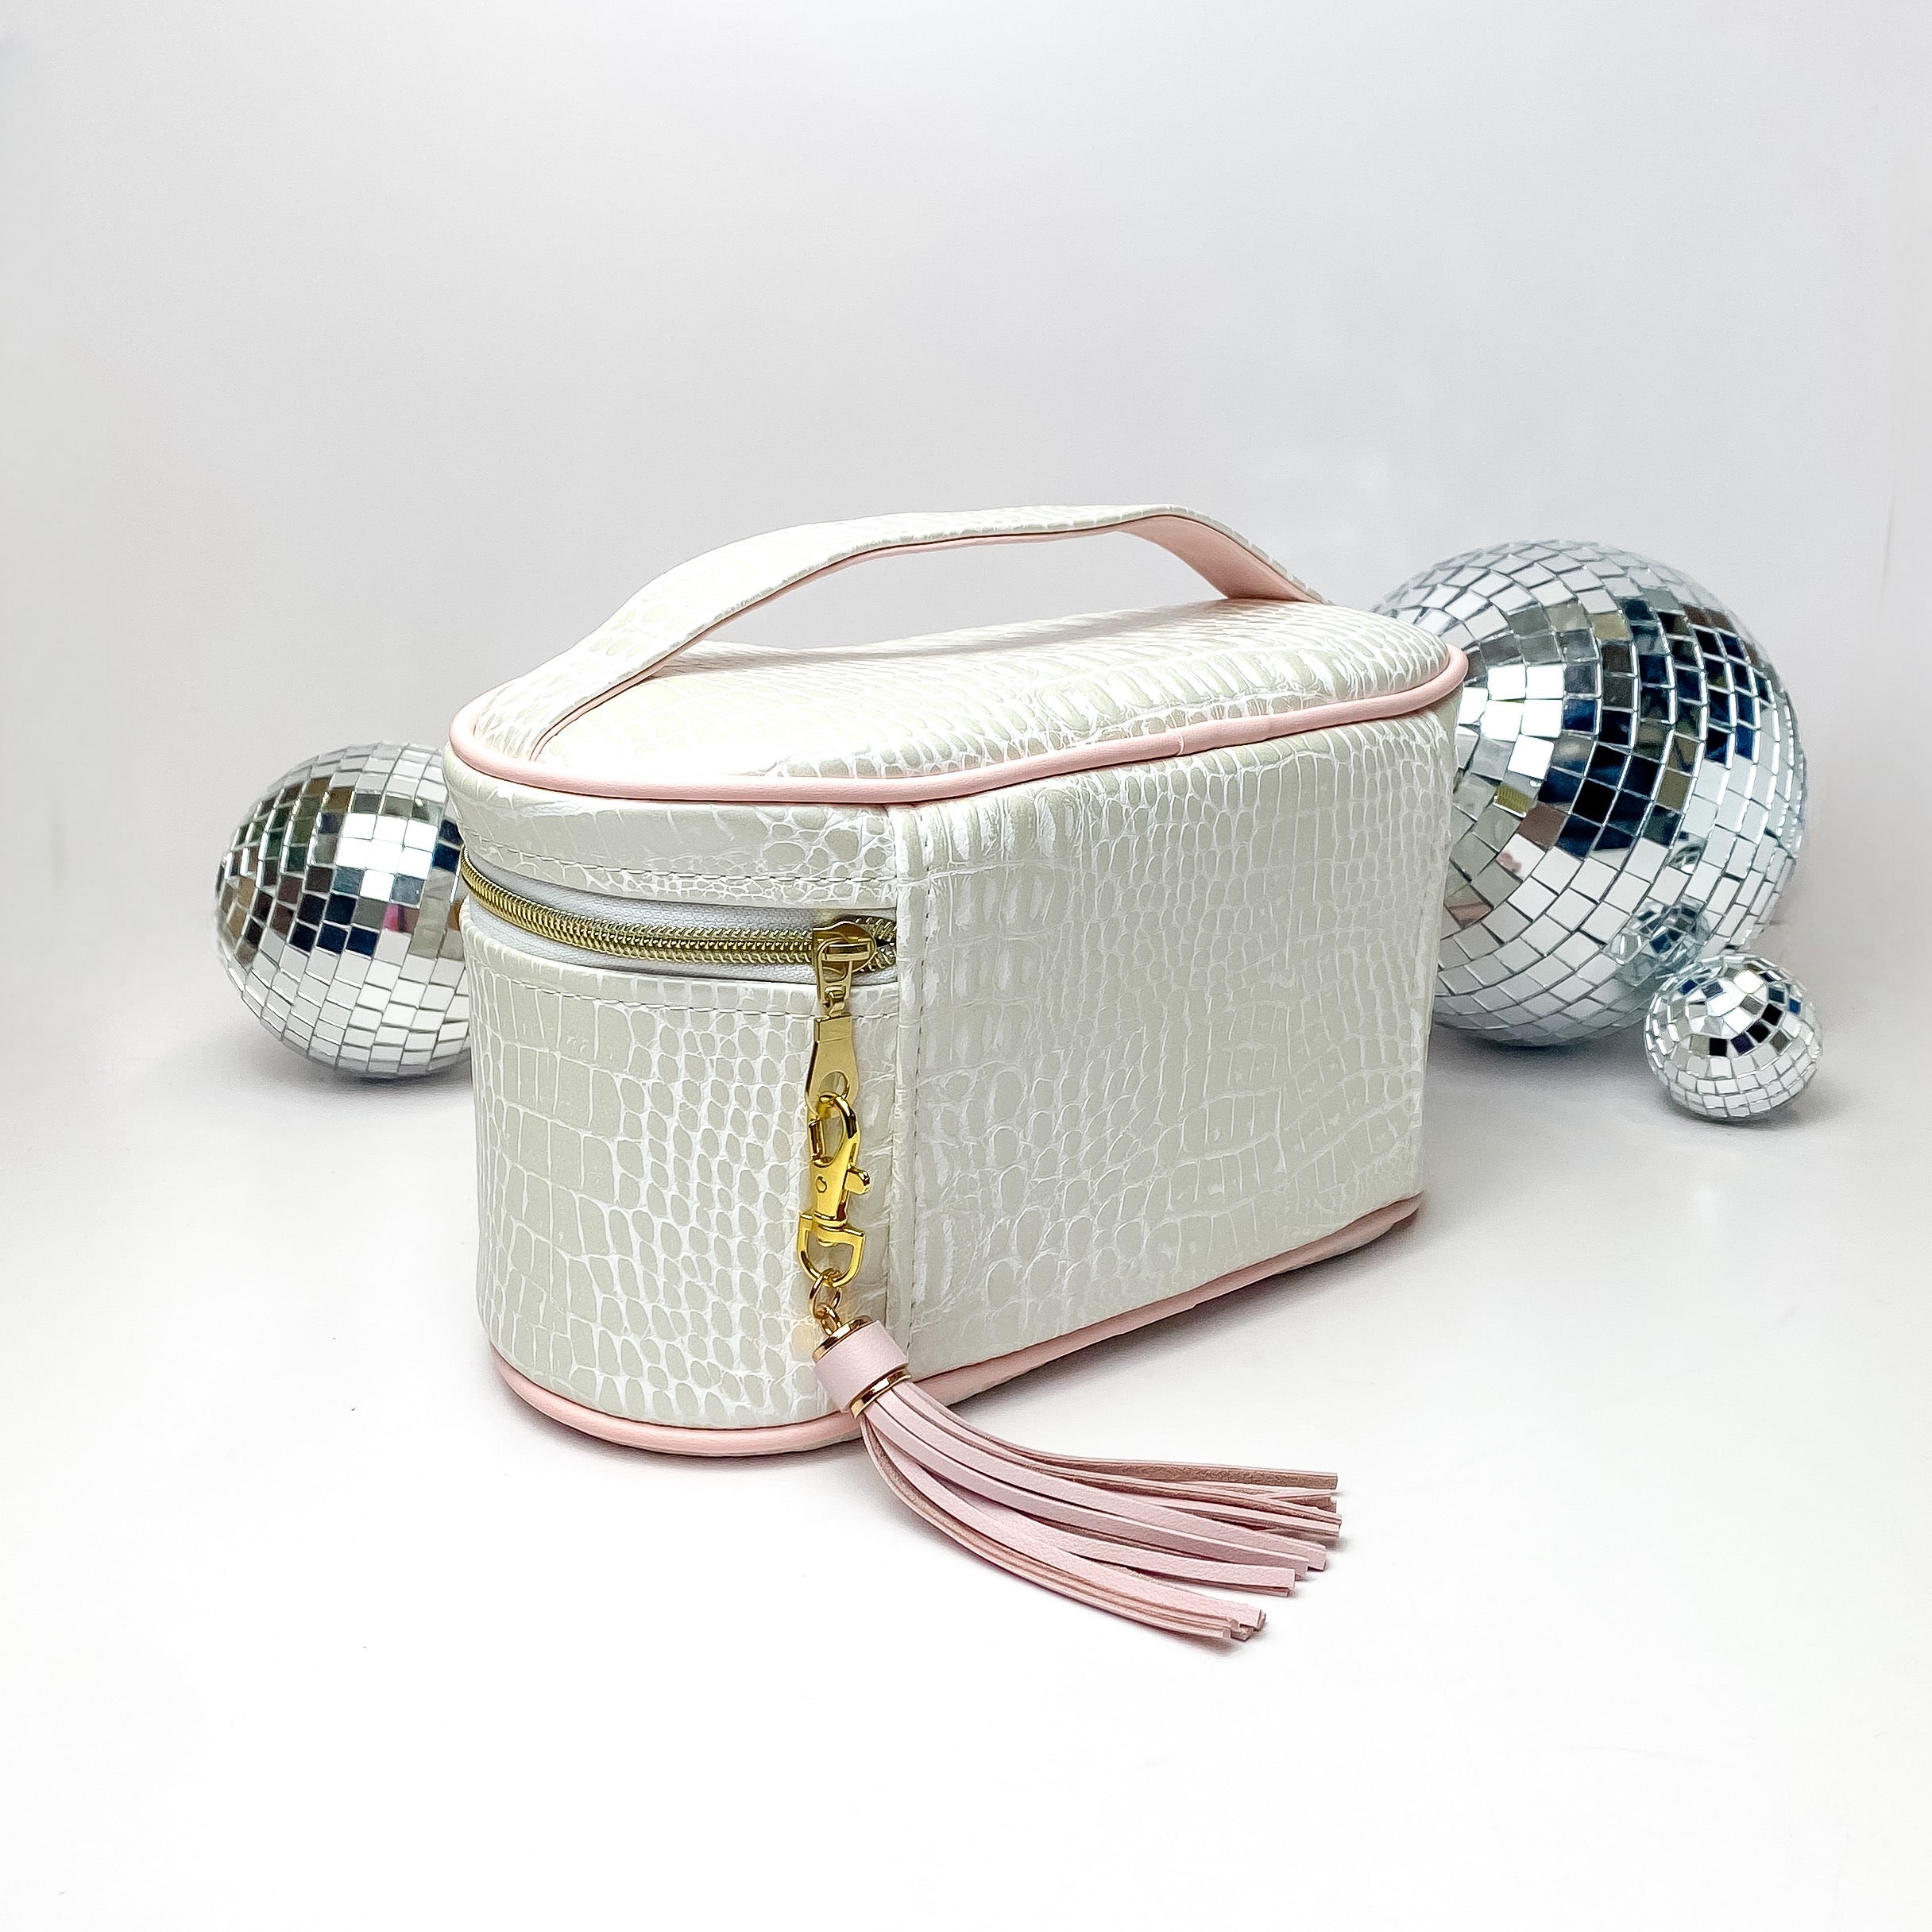 Makeup Junkie | Small Shade of Pearl Train Case in Pearl White Croc Print